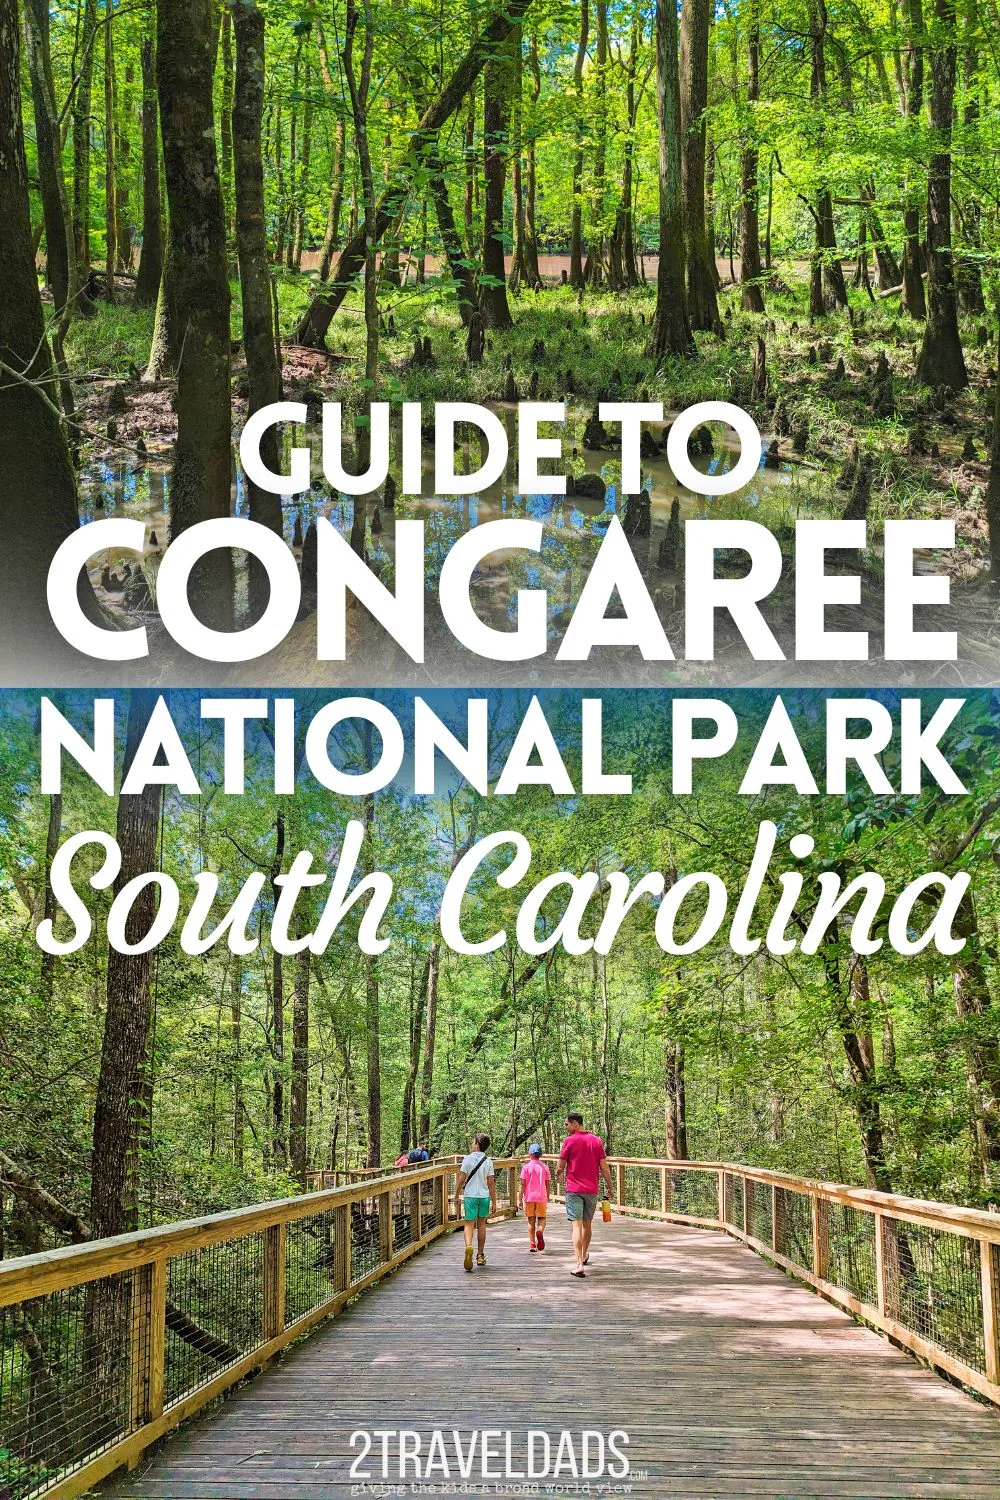 Visiting Congaree National Park is a great addition to any road trip through the Southeast. See all the things to do, how to plan your trip, and the details of observing the synchronous fireflies here at Congaree NP near Columbia, SC.